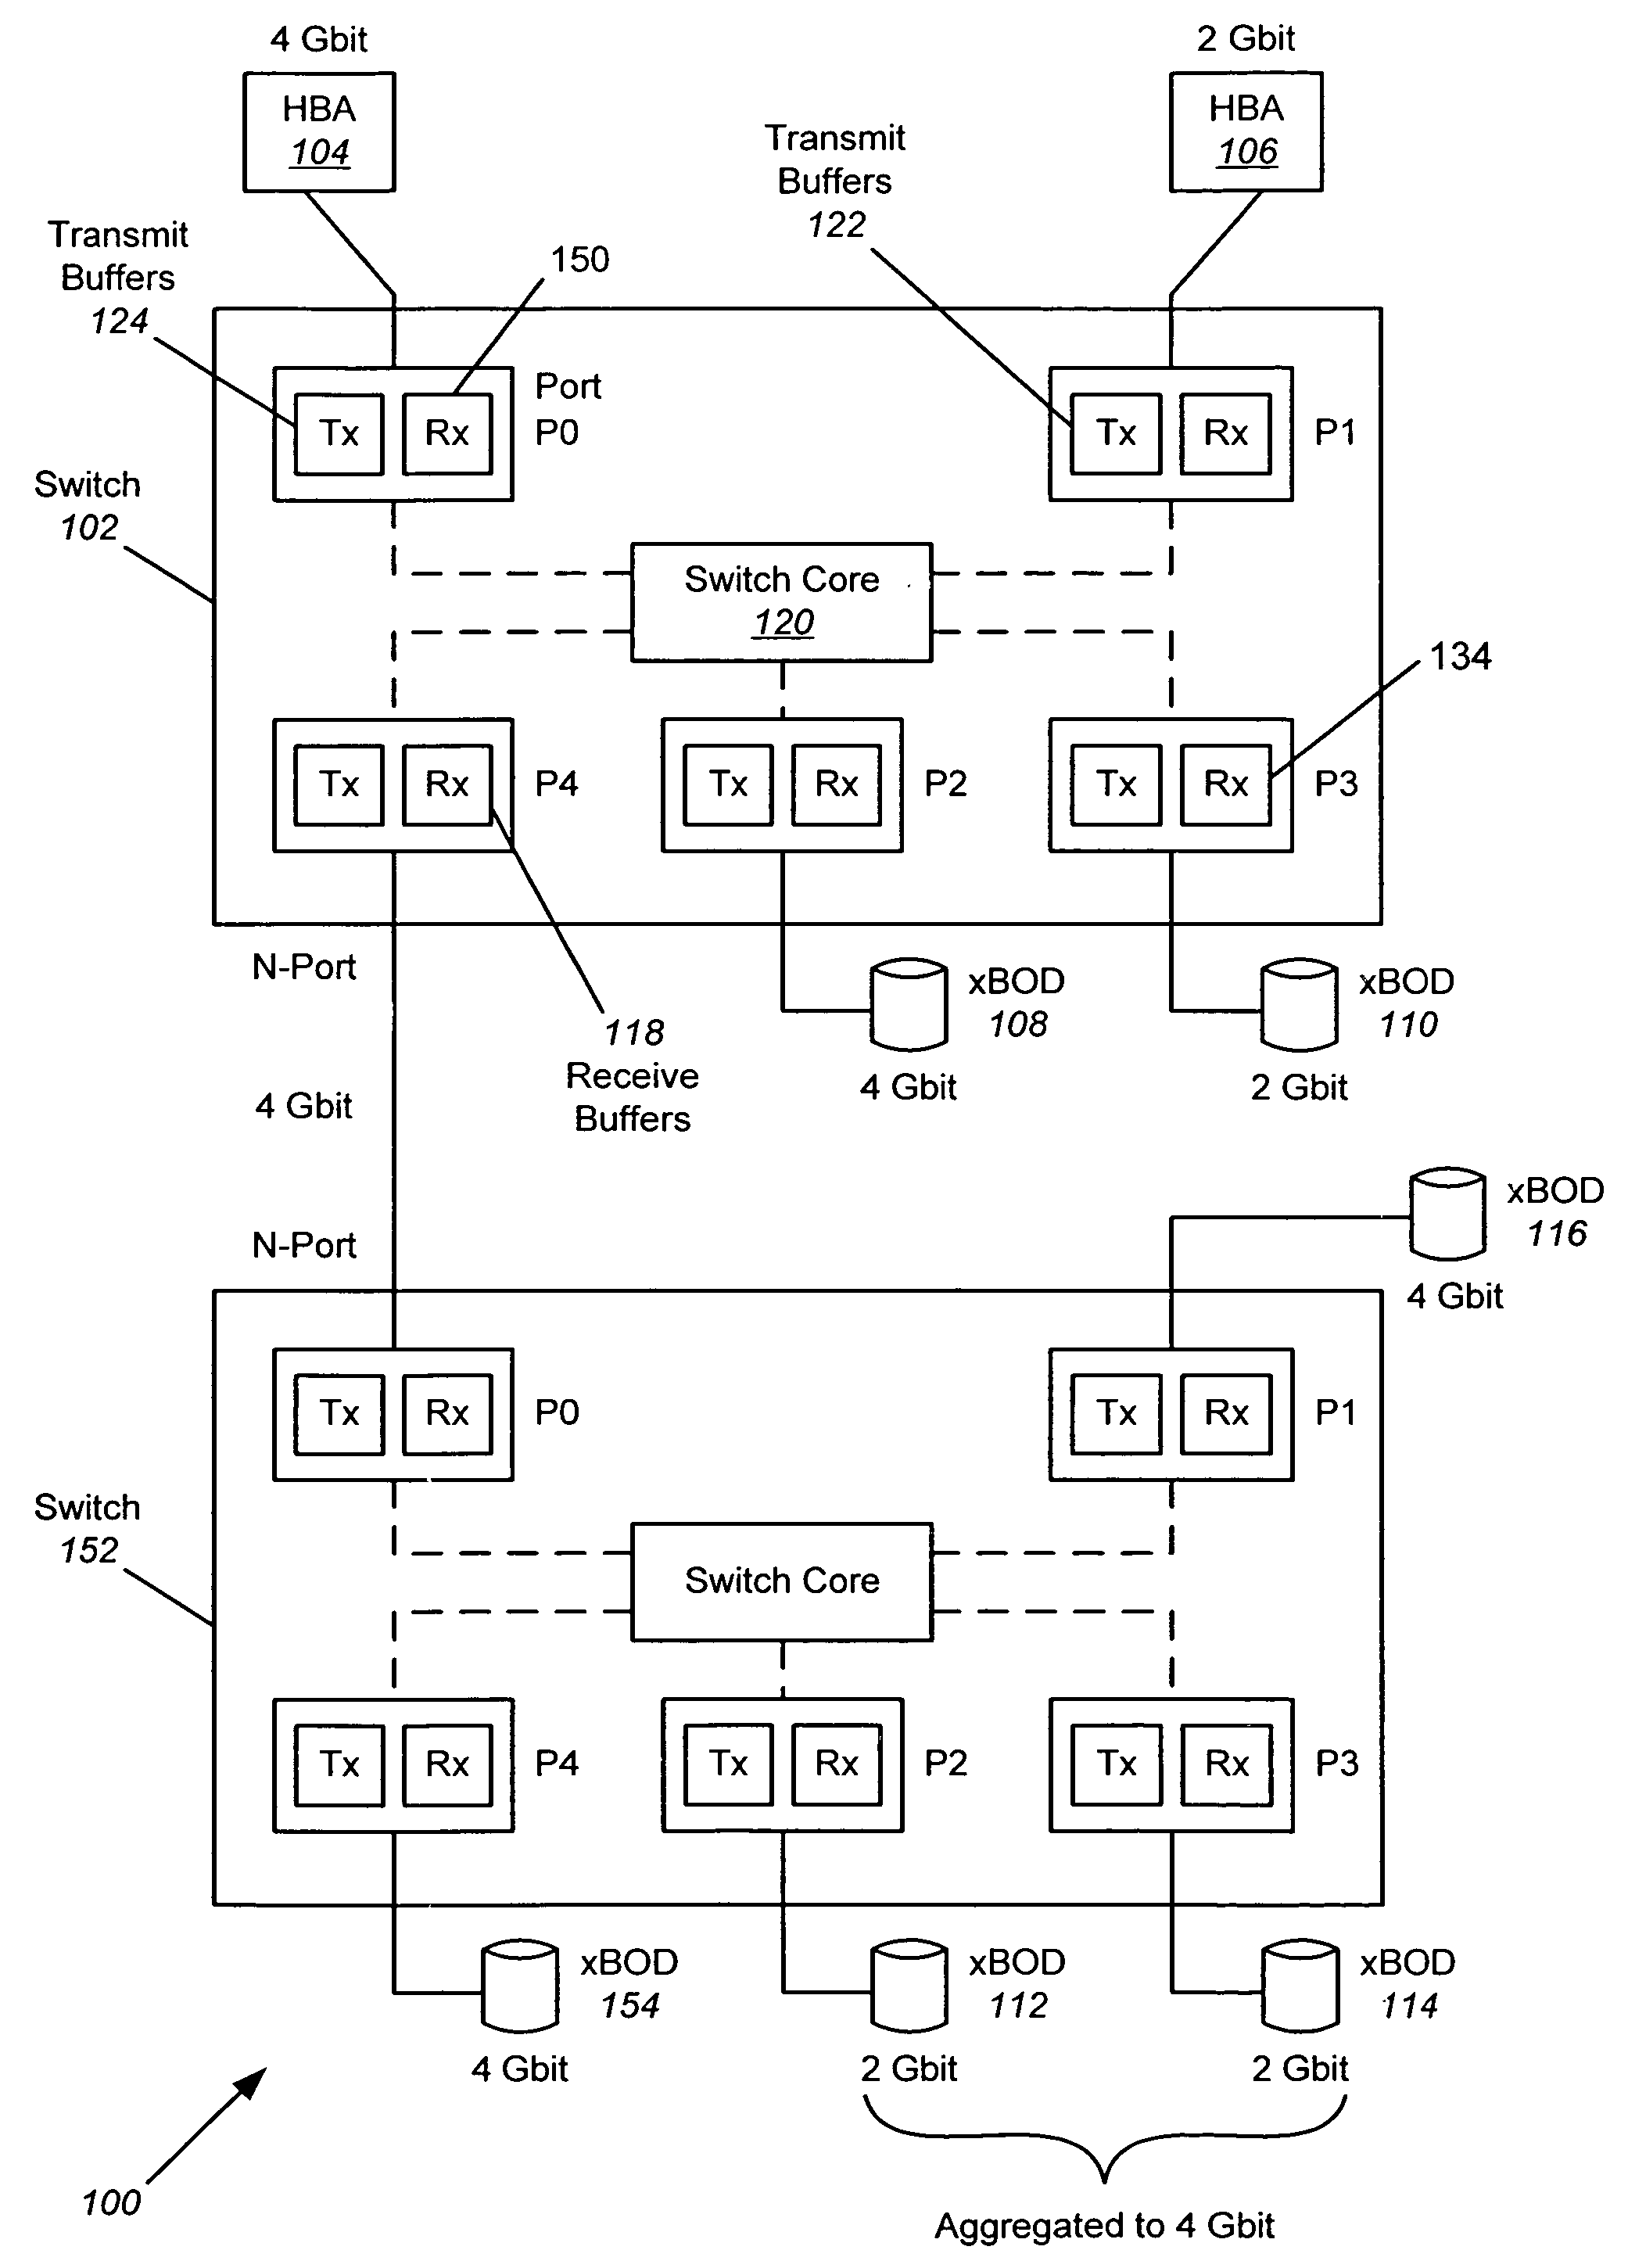 Prevention of head of line blocking in a multi-rate switched Fibre Channel loop attached system